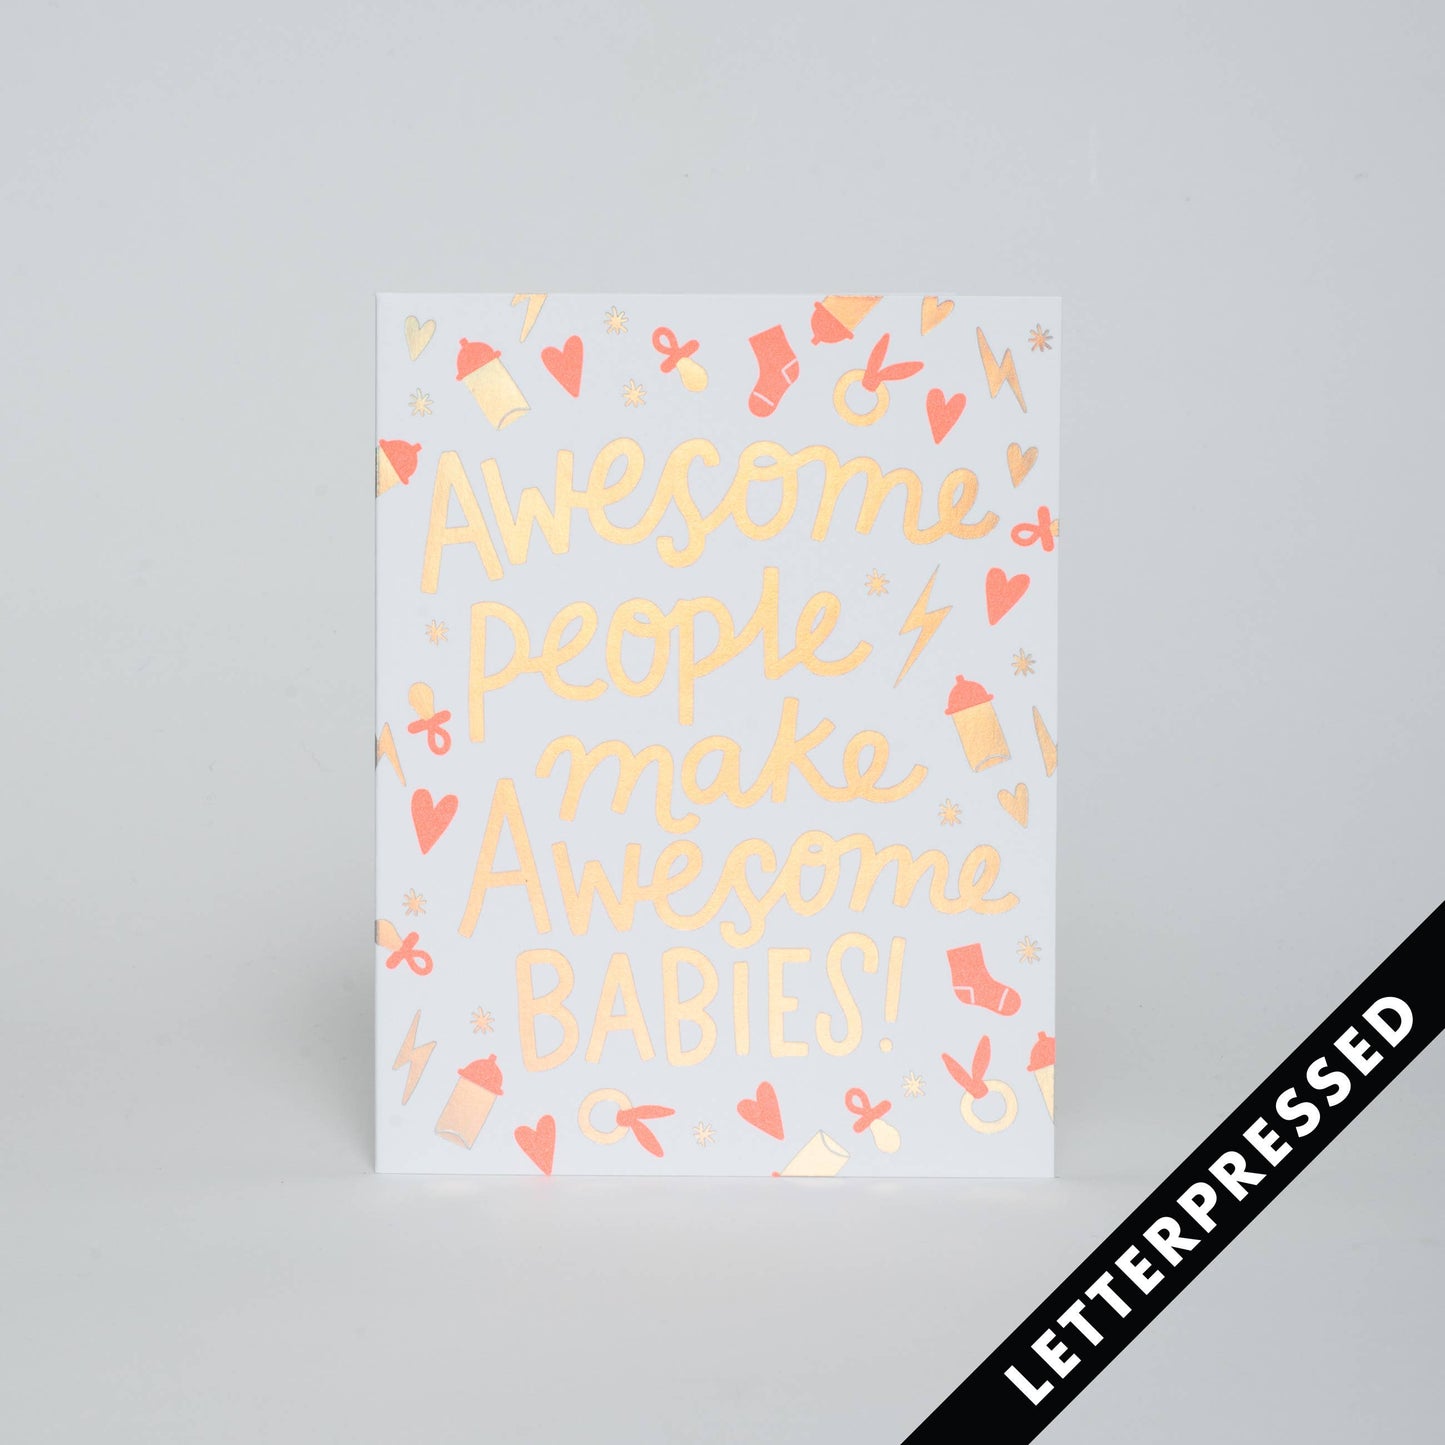 HELLO! LUCKY -- Awesome Babies Greeting Card